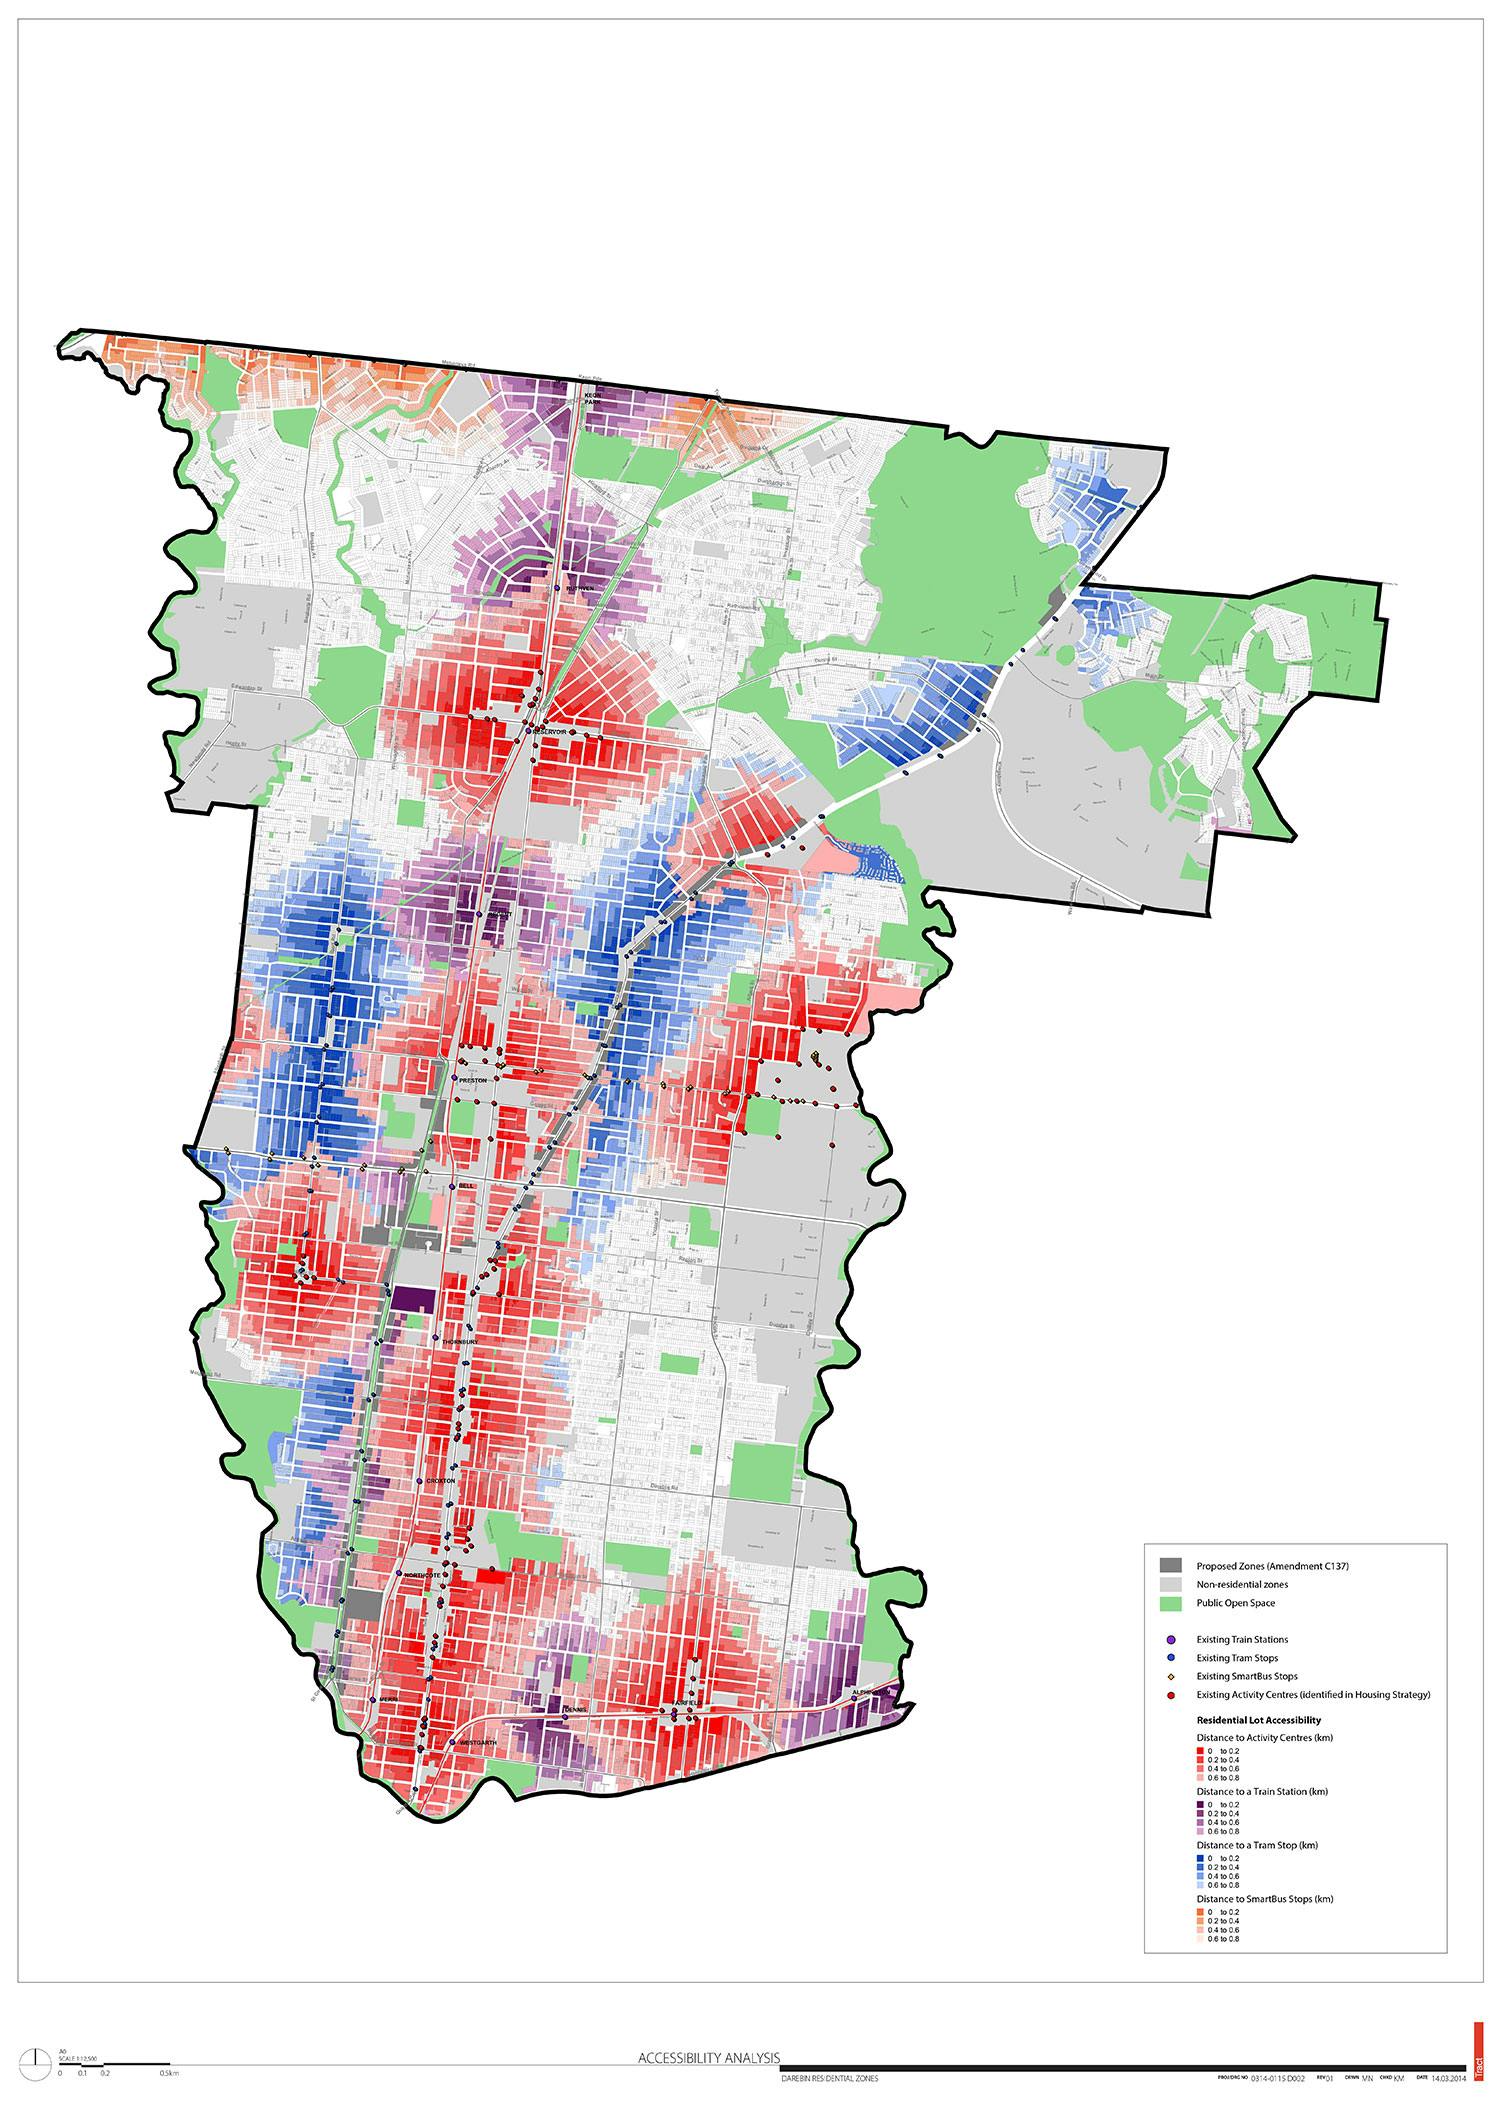 Accessibility Analysis (800m Walking Catchments from activity centres and major transport) Municipal Map